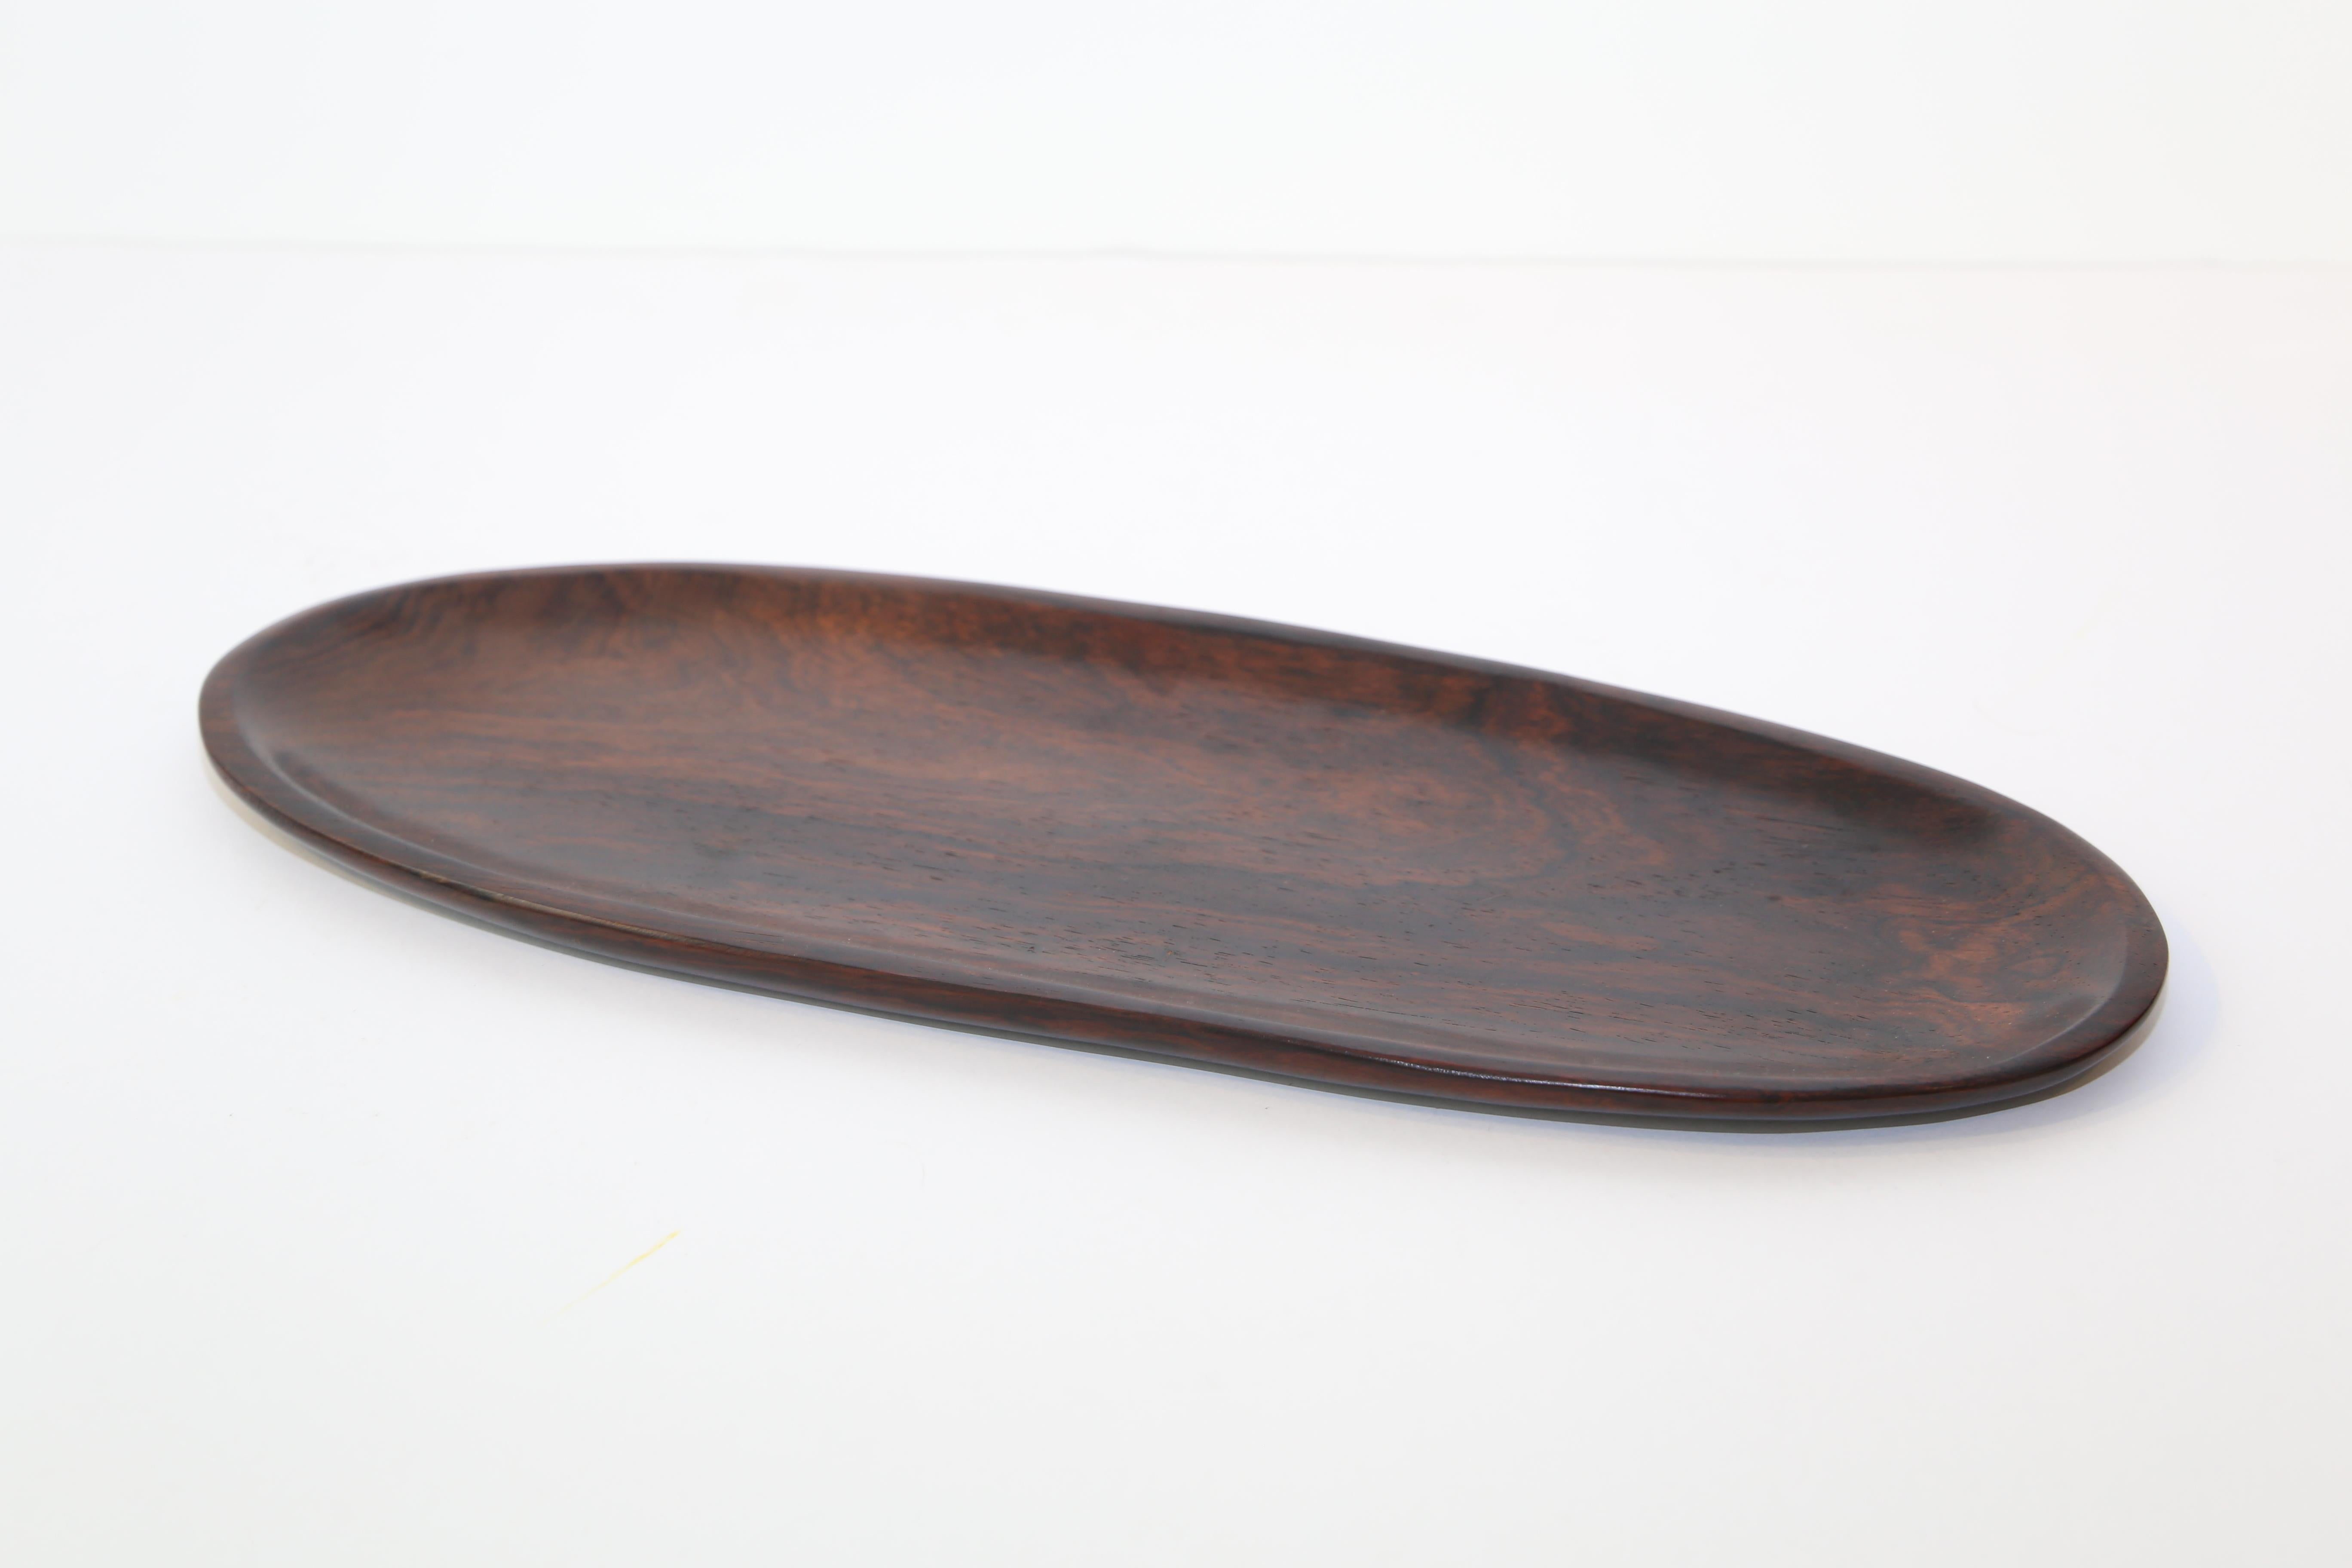 Odile Noll's rosewood plate
1950